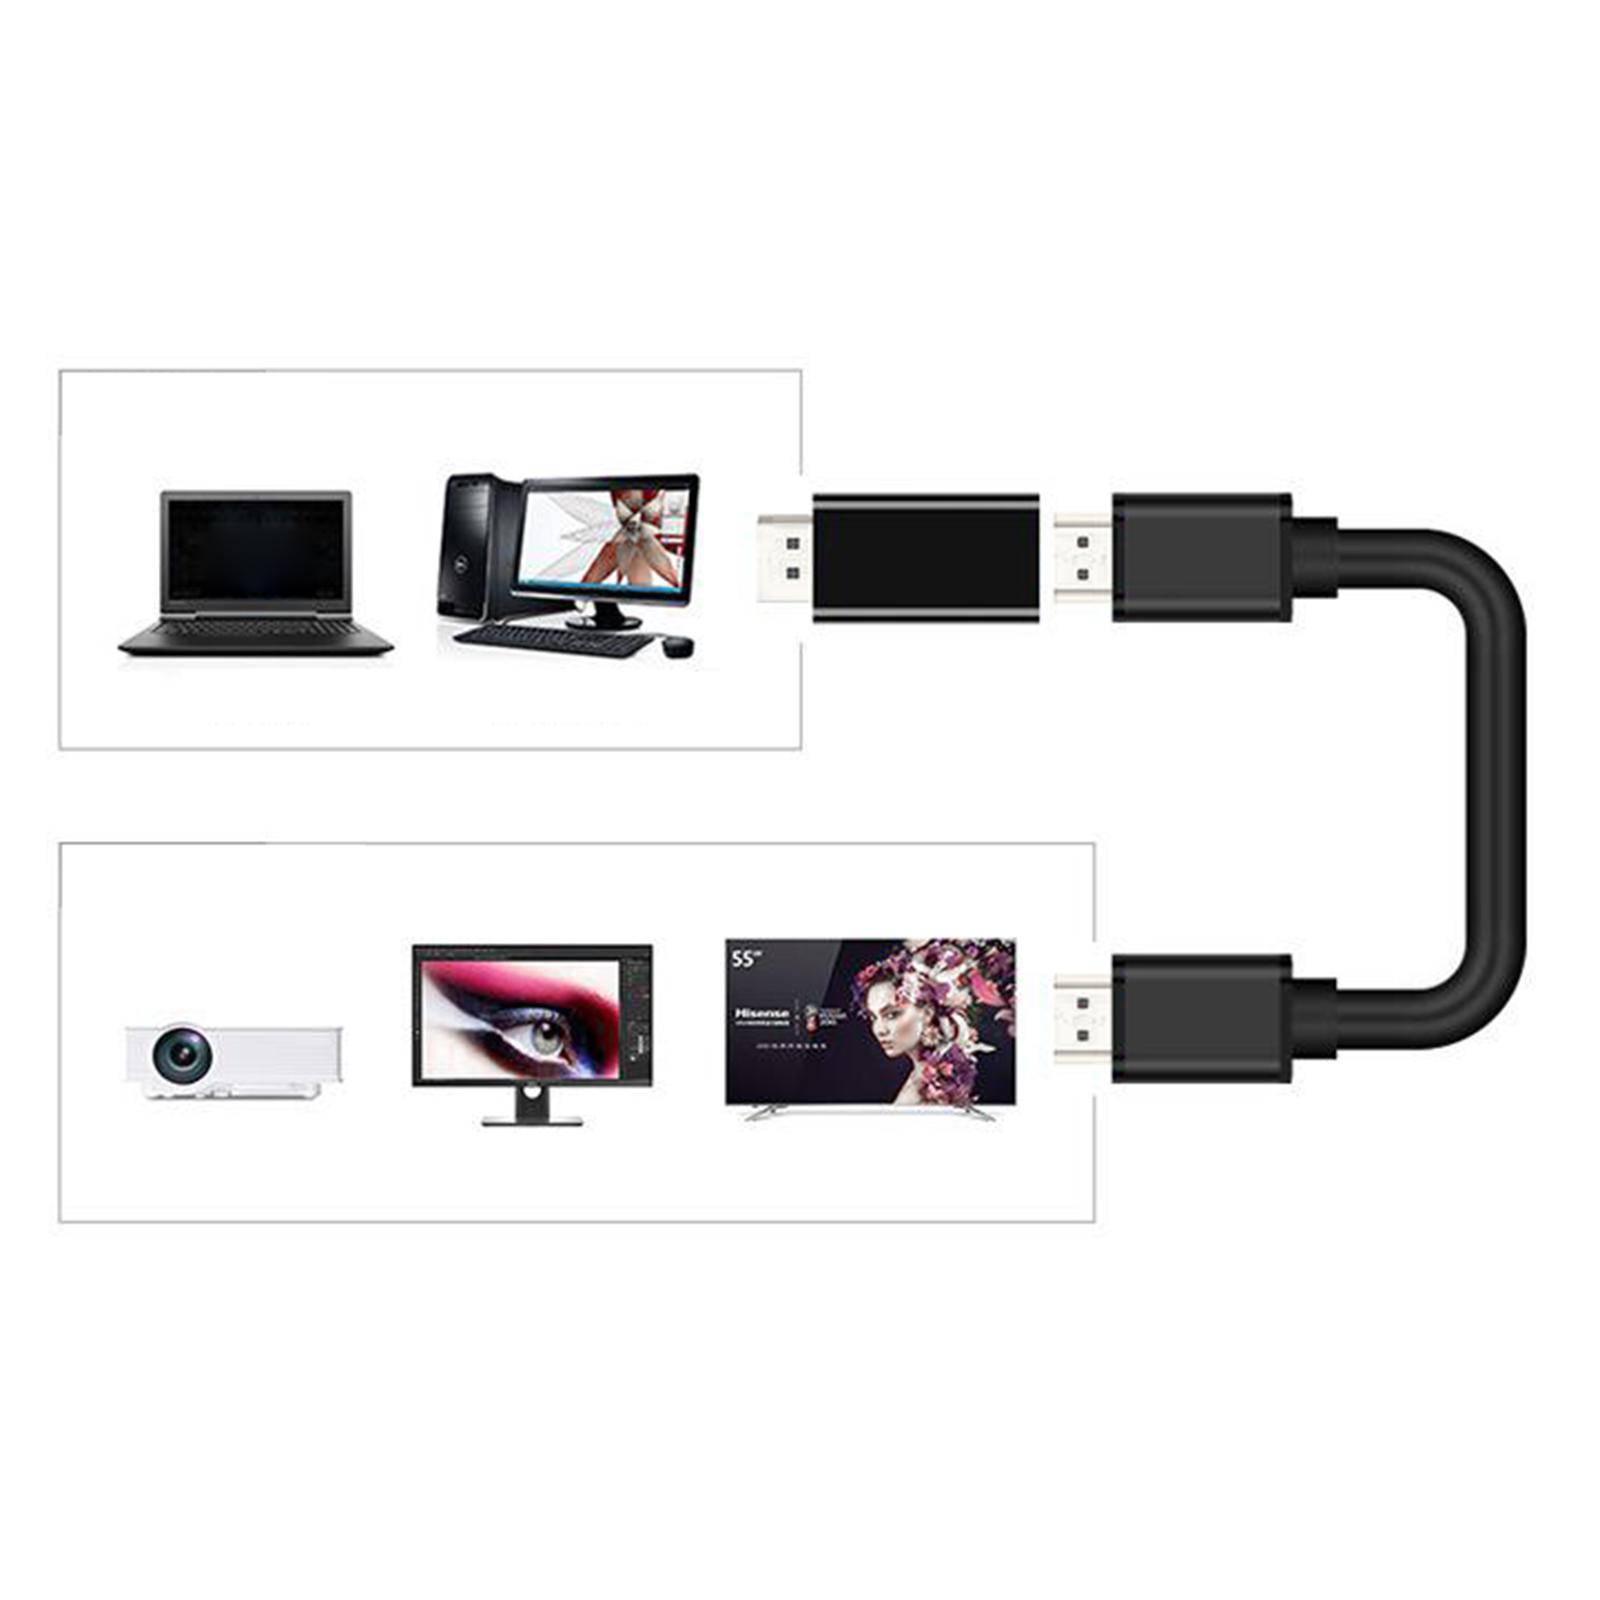 Display Port to HDMI Adapter Converter DP to HDMI for PC Laptop Desktop